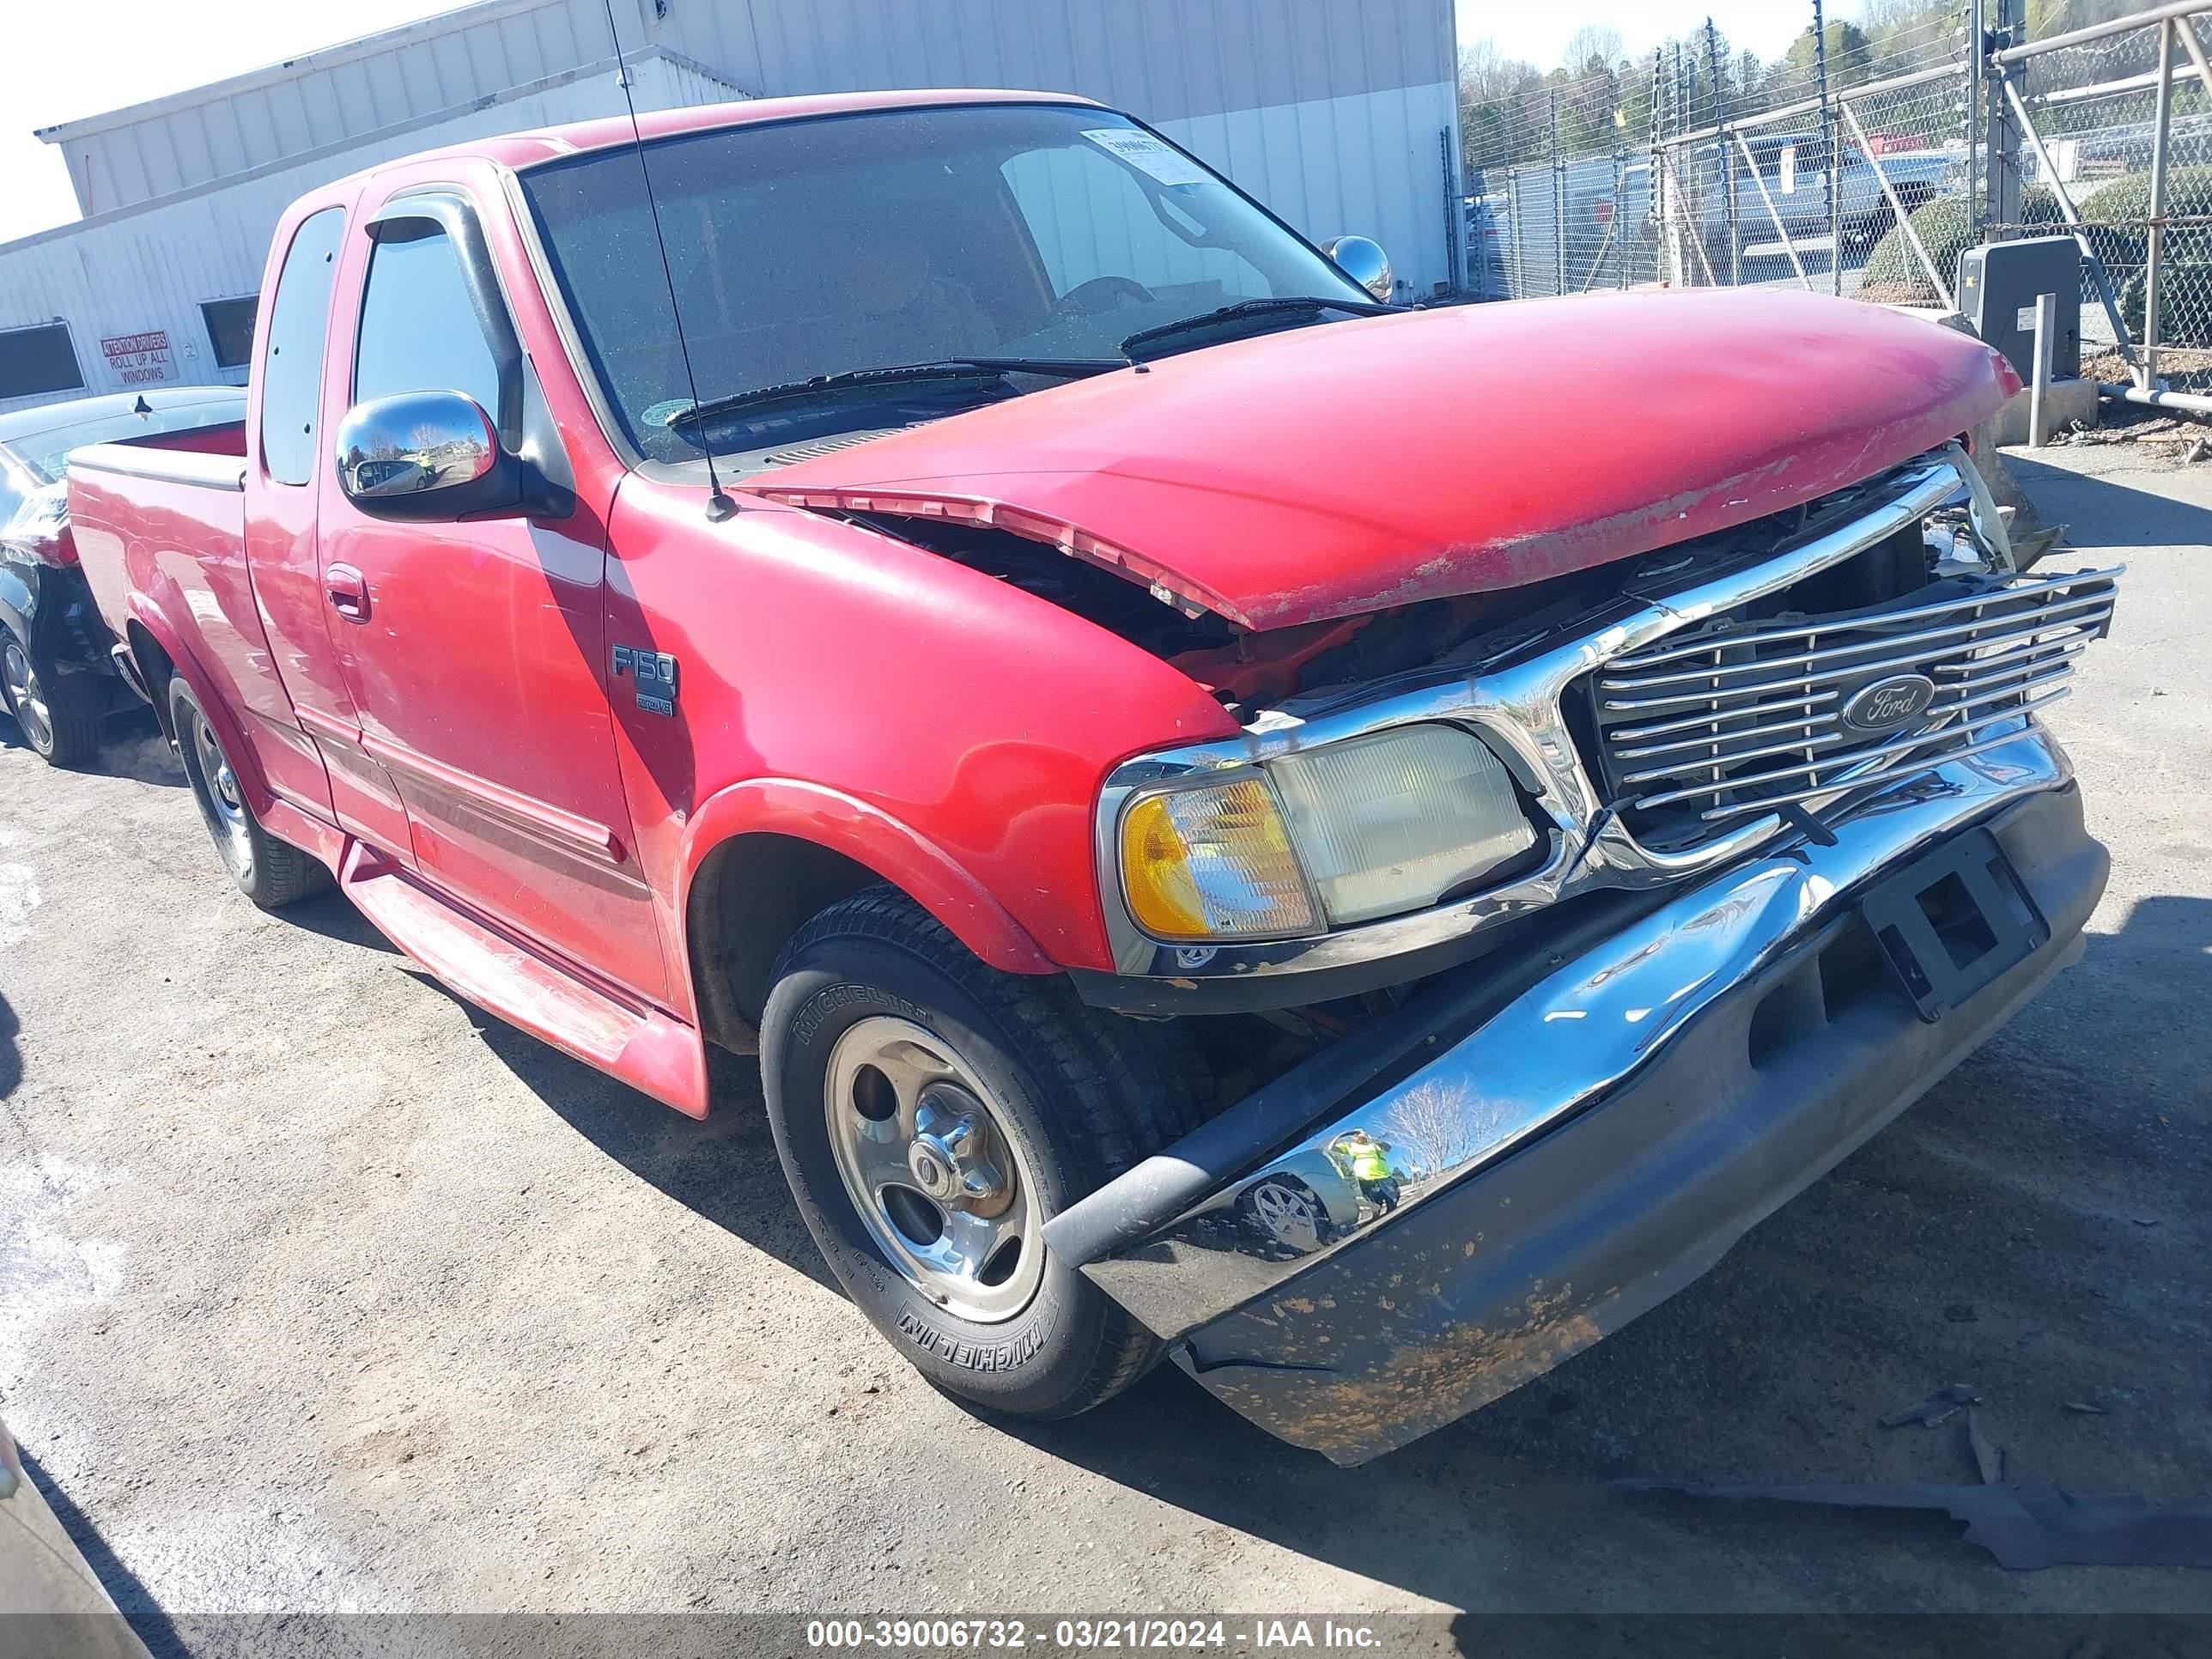 vin: 1FTRX17W72NA34249 1FTRX17W72NA34249 2002 ford f-150 4600 for Sale in 27253, 171 Carden Road, Graham, USA